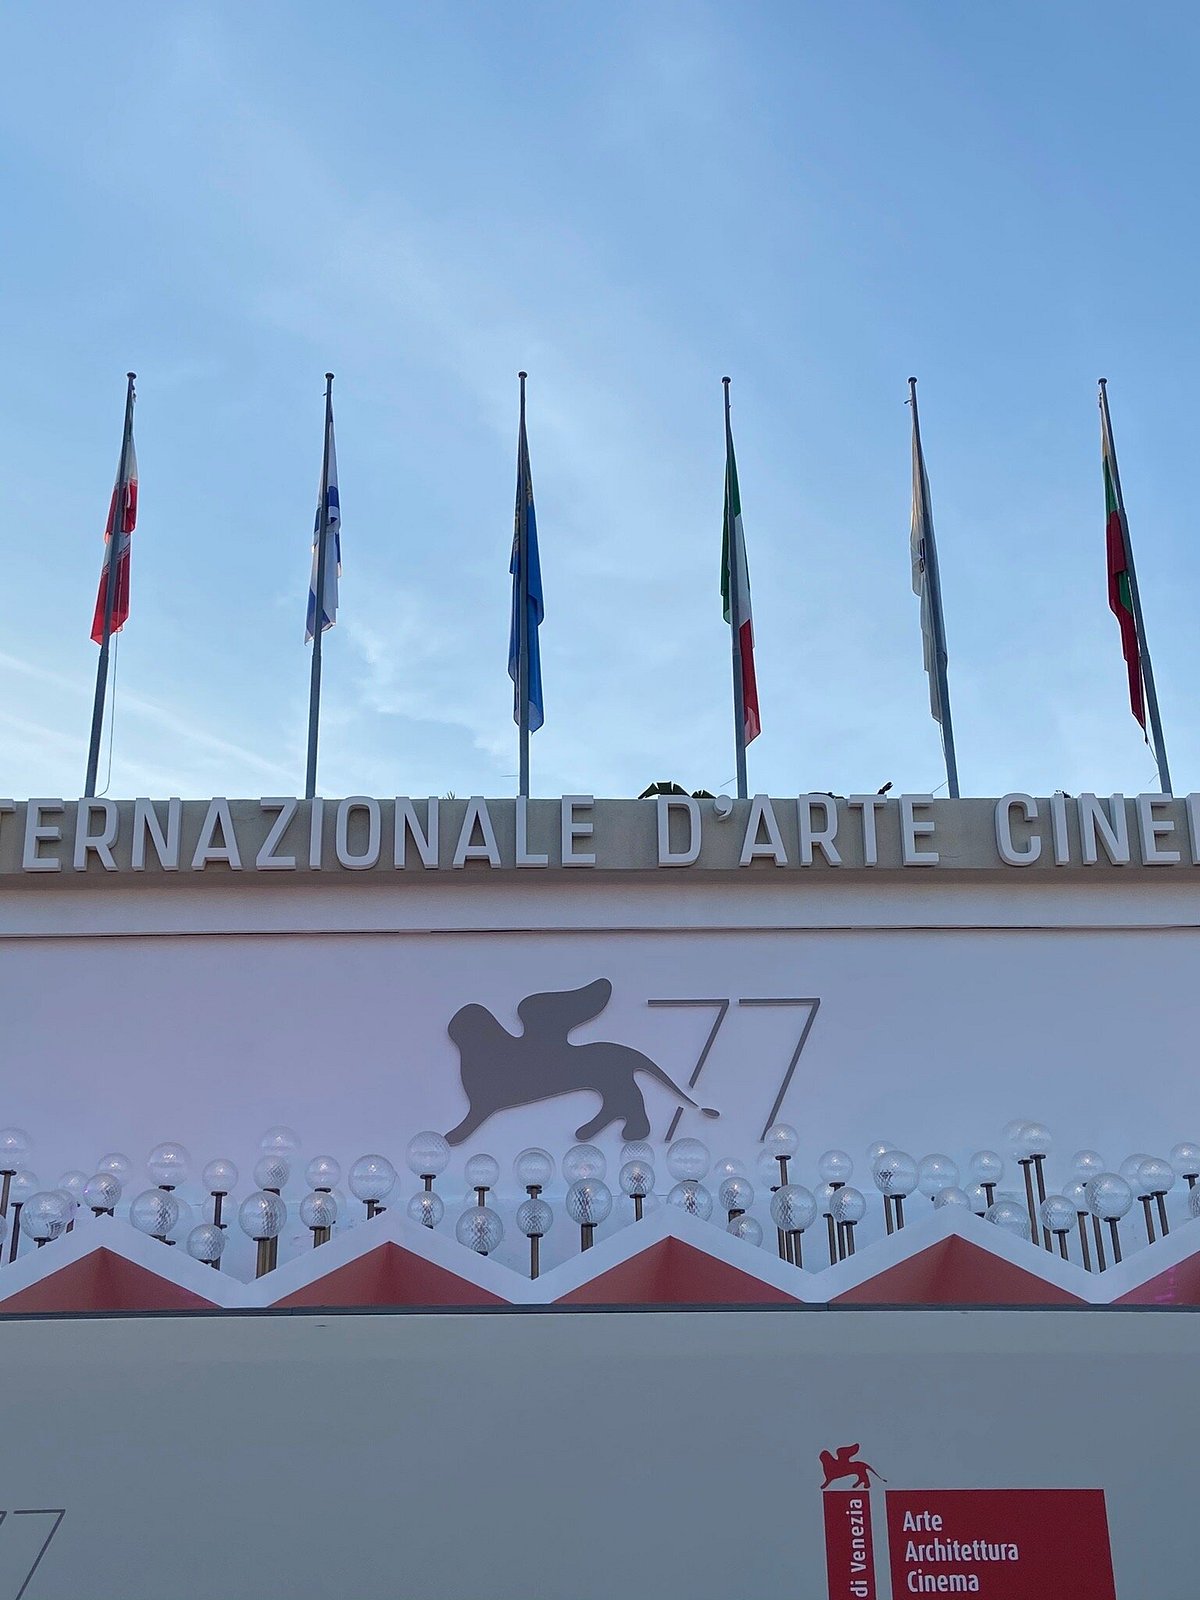 Venice International Film Festival - All You Need to Know BEFORE You Go